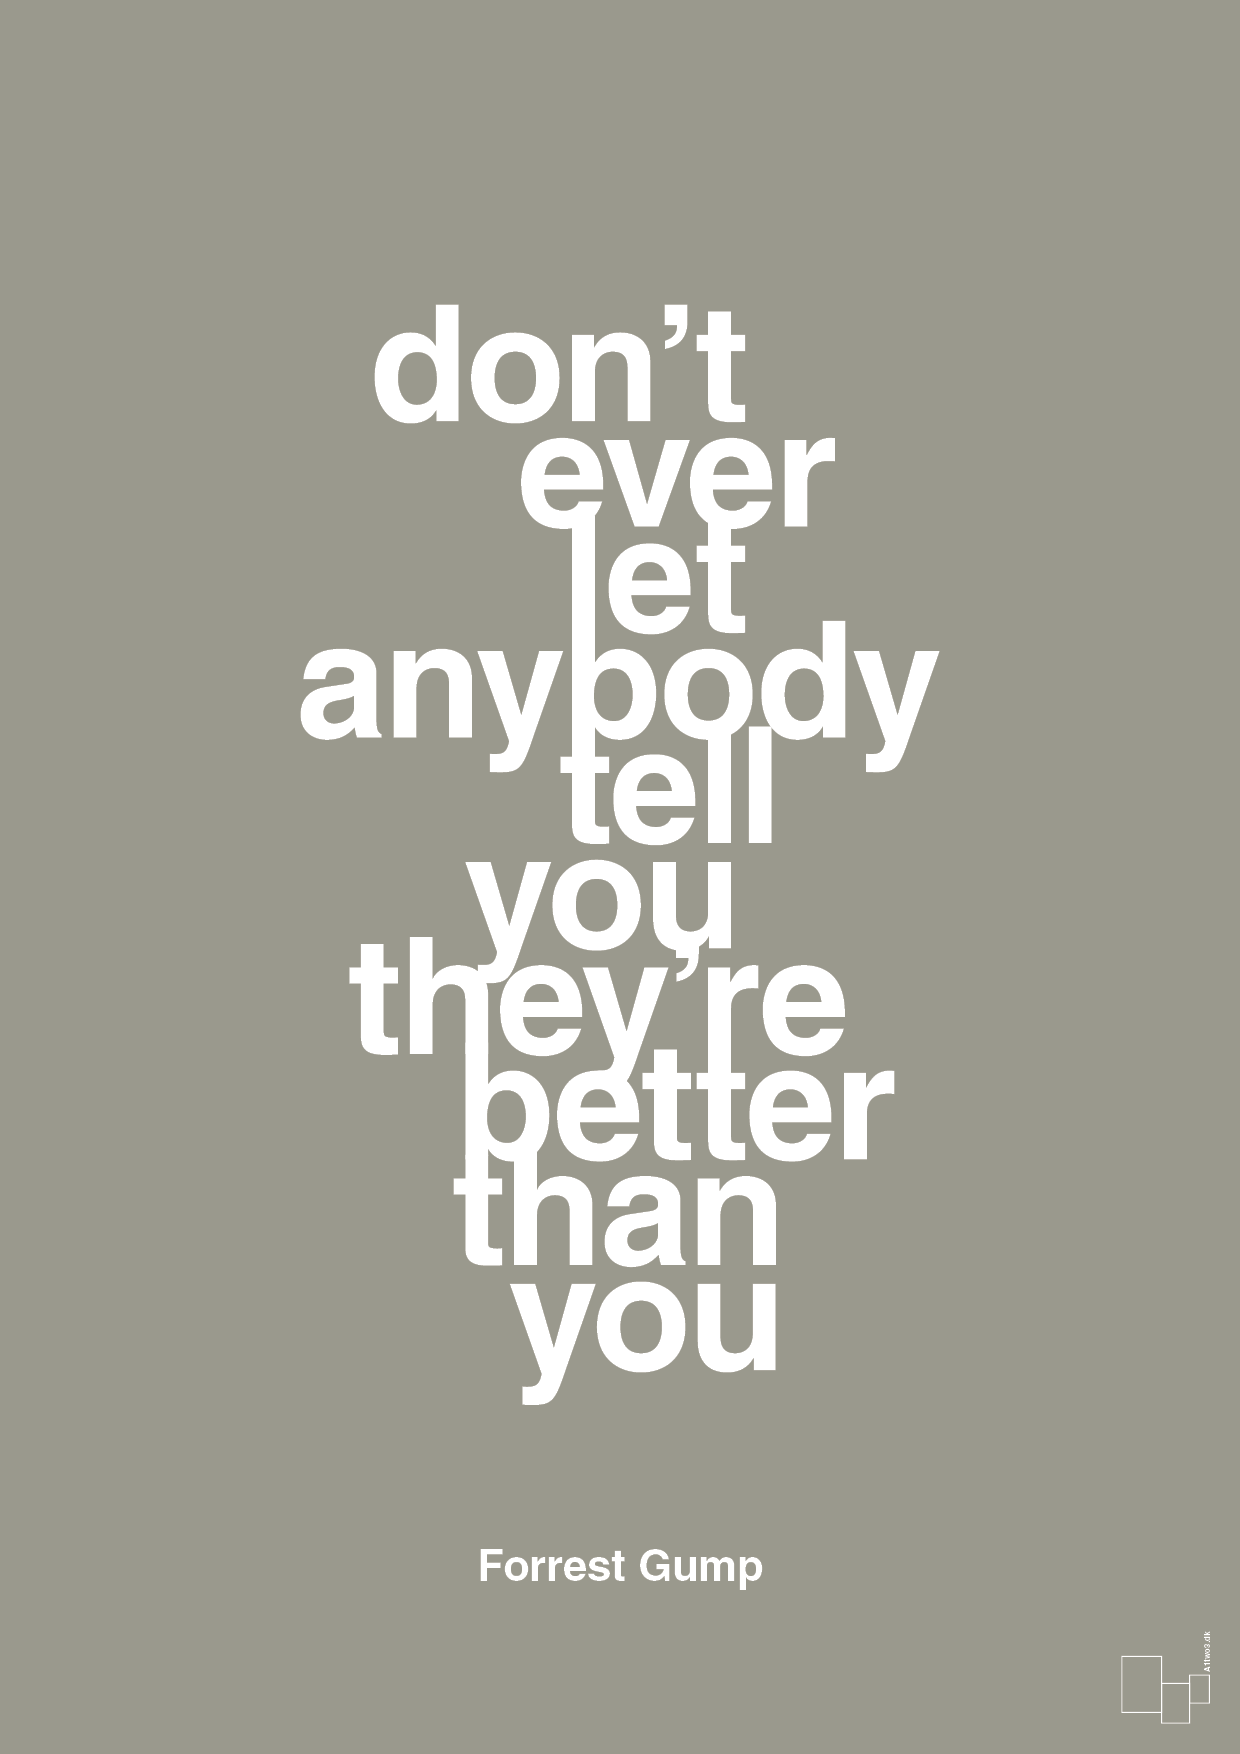 don’t ever let anybody tell you they’re better than you - Plakat med Citater i Battleship Gray